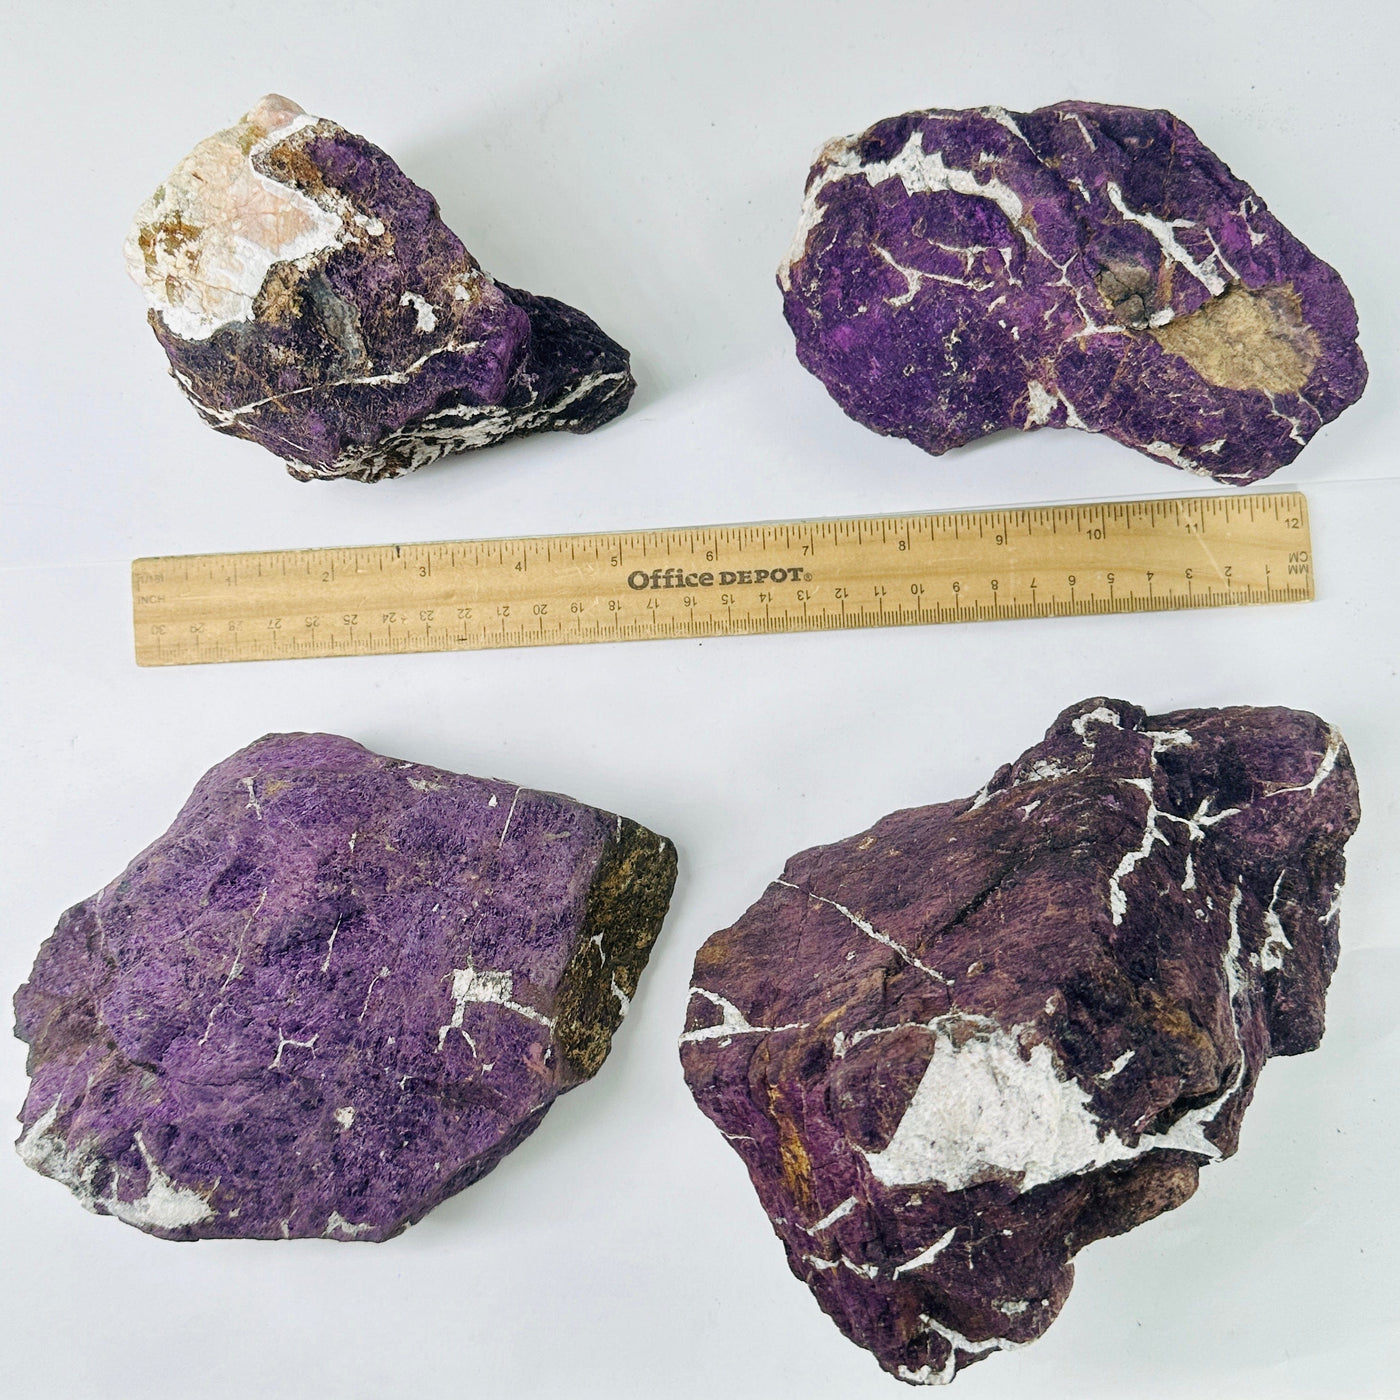  Purpurite Rough Stone - YOU CHOOSE all four variants with ruler for size reference